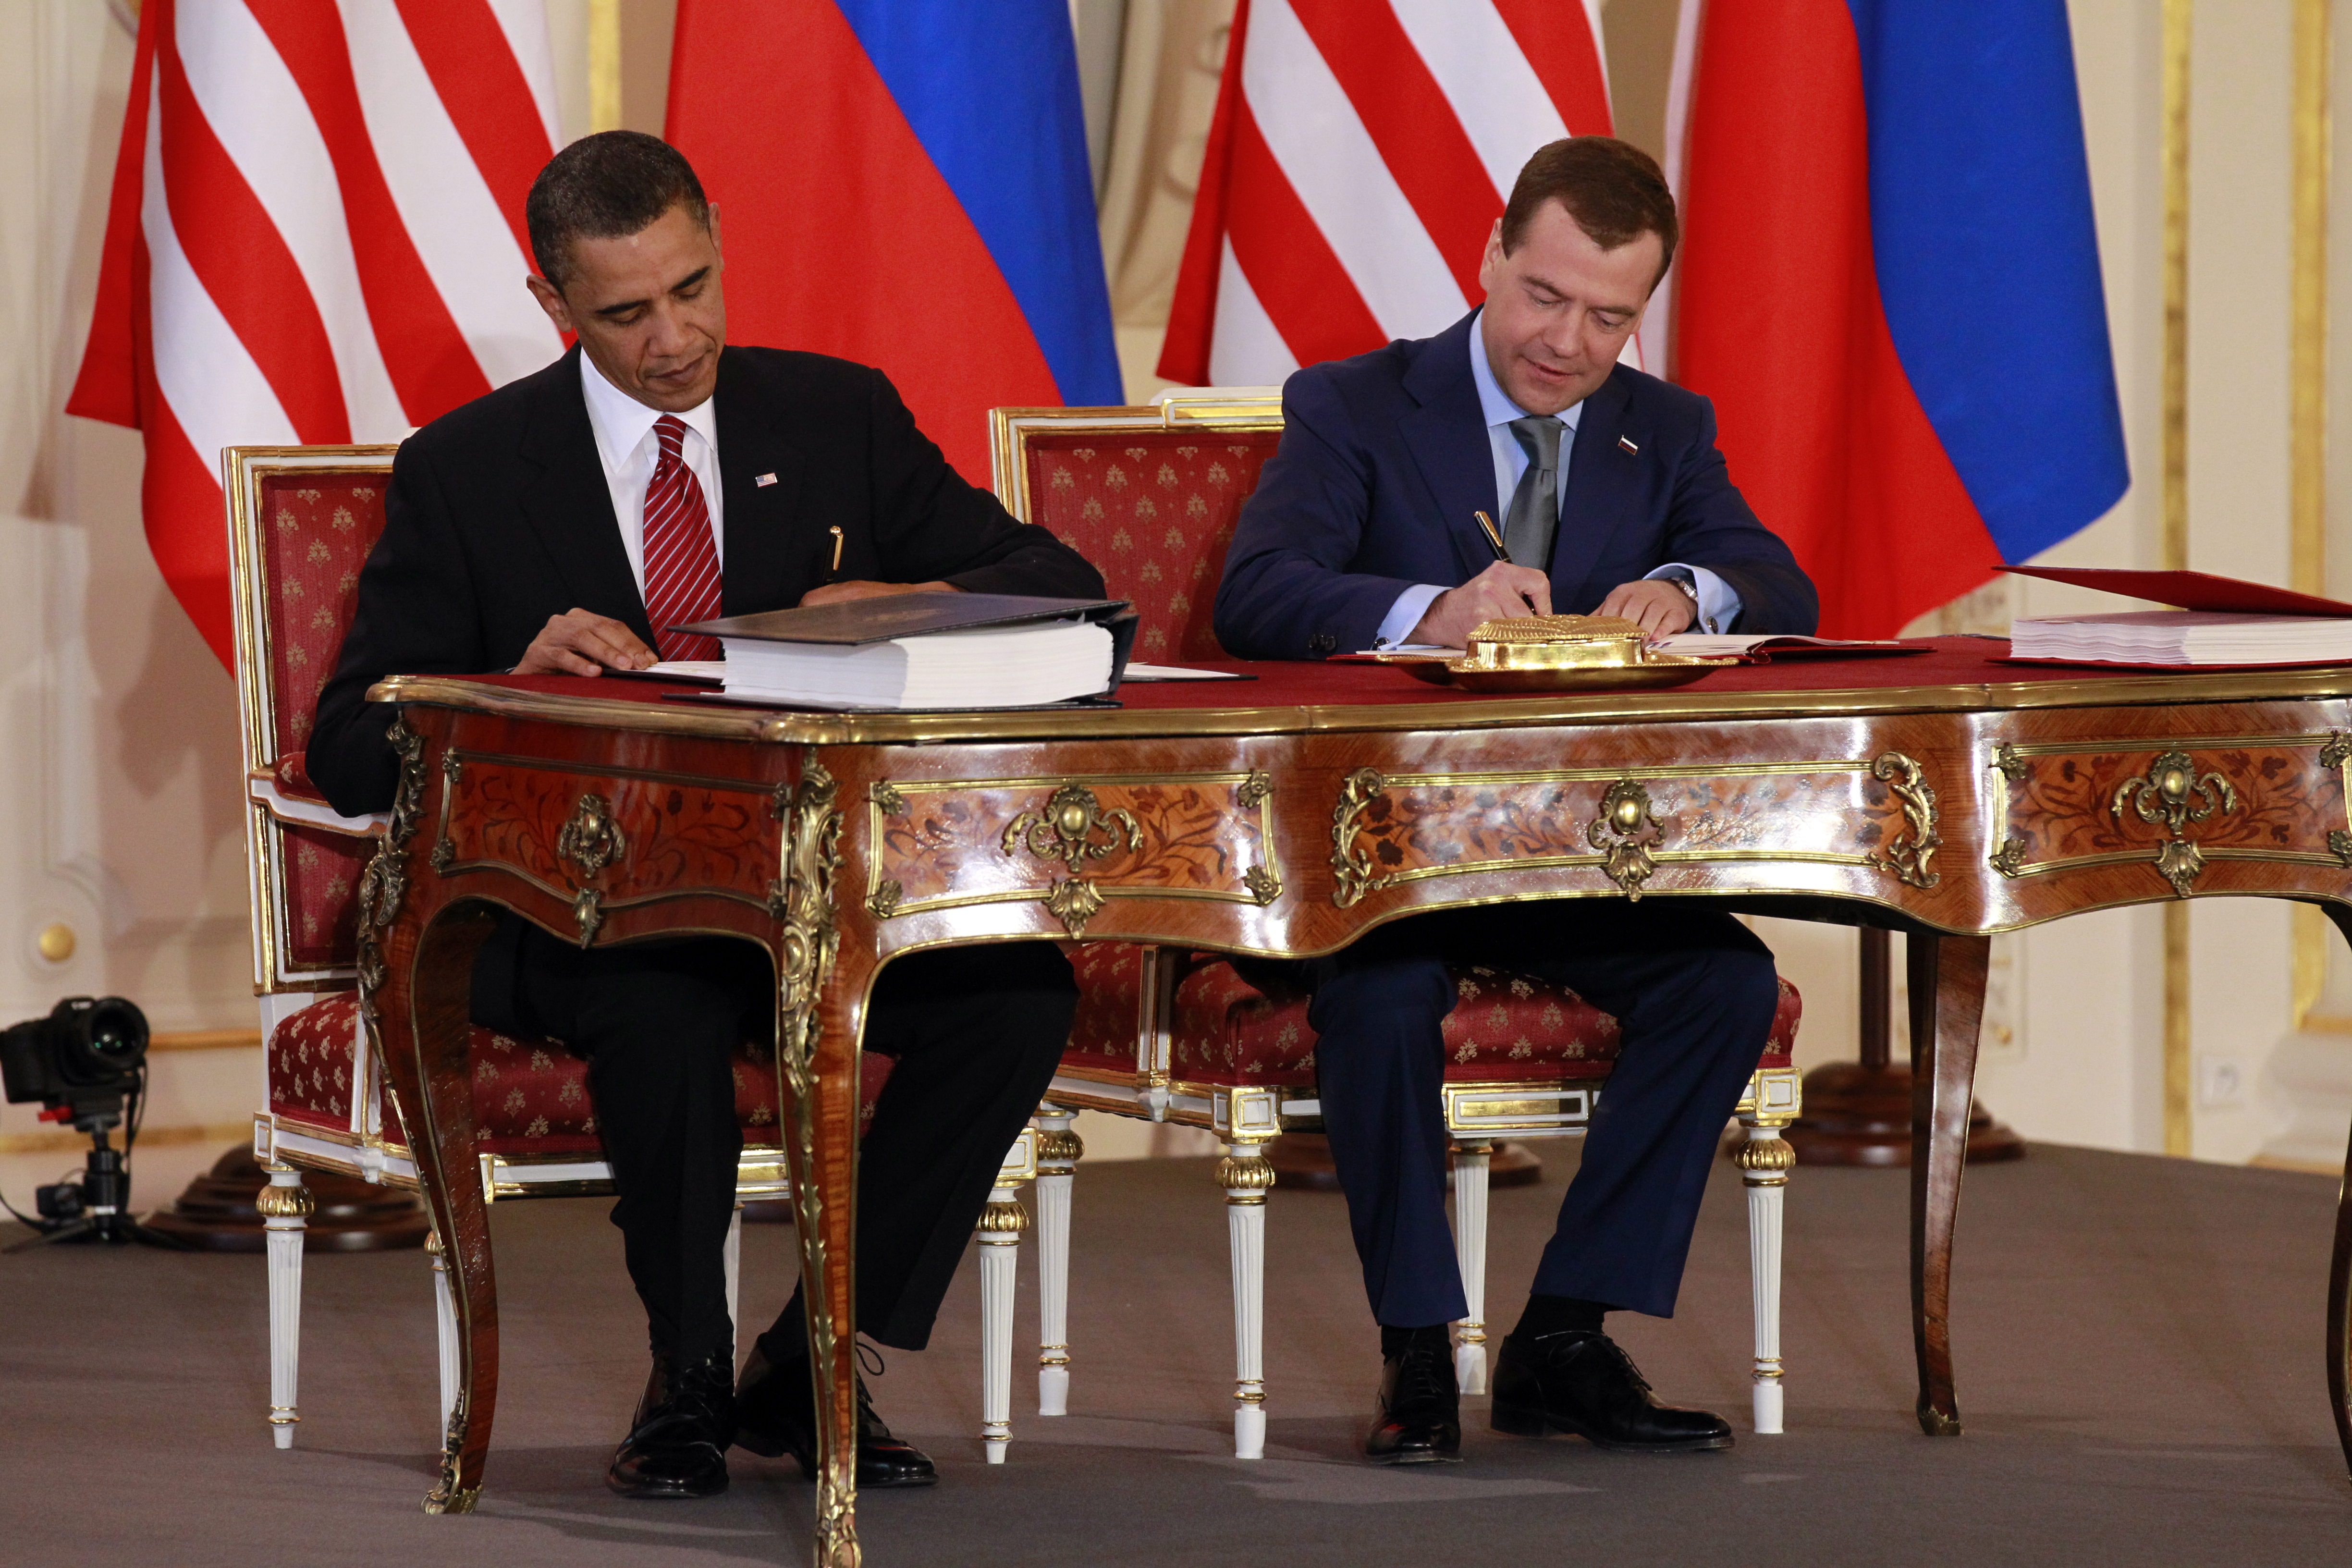 Former Presidents Barack Obama of the United States, left, and Dmitry Medvedev of Russia sign the New START nuclear treaty April 8, 2010 at Prague Castle.  AP Photo/Alex Brandon/File